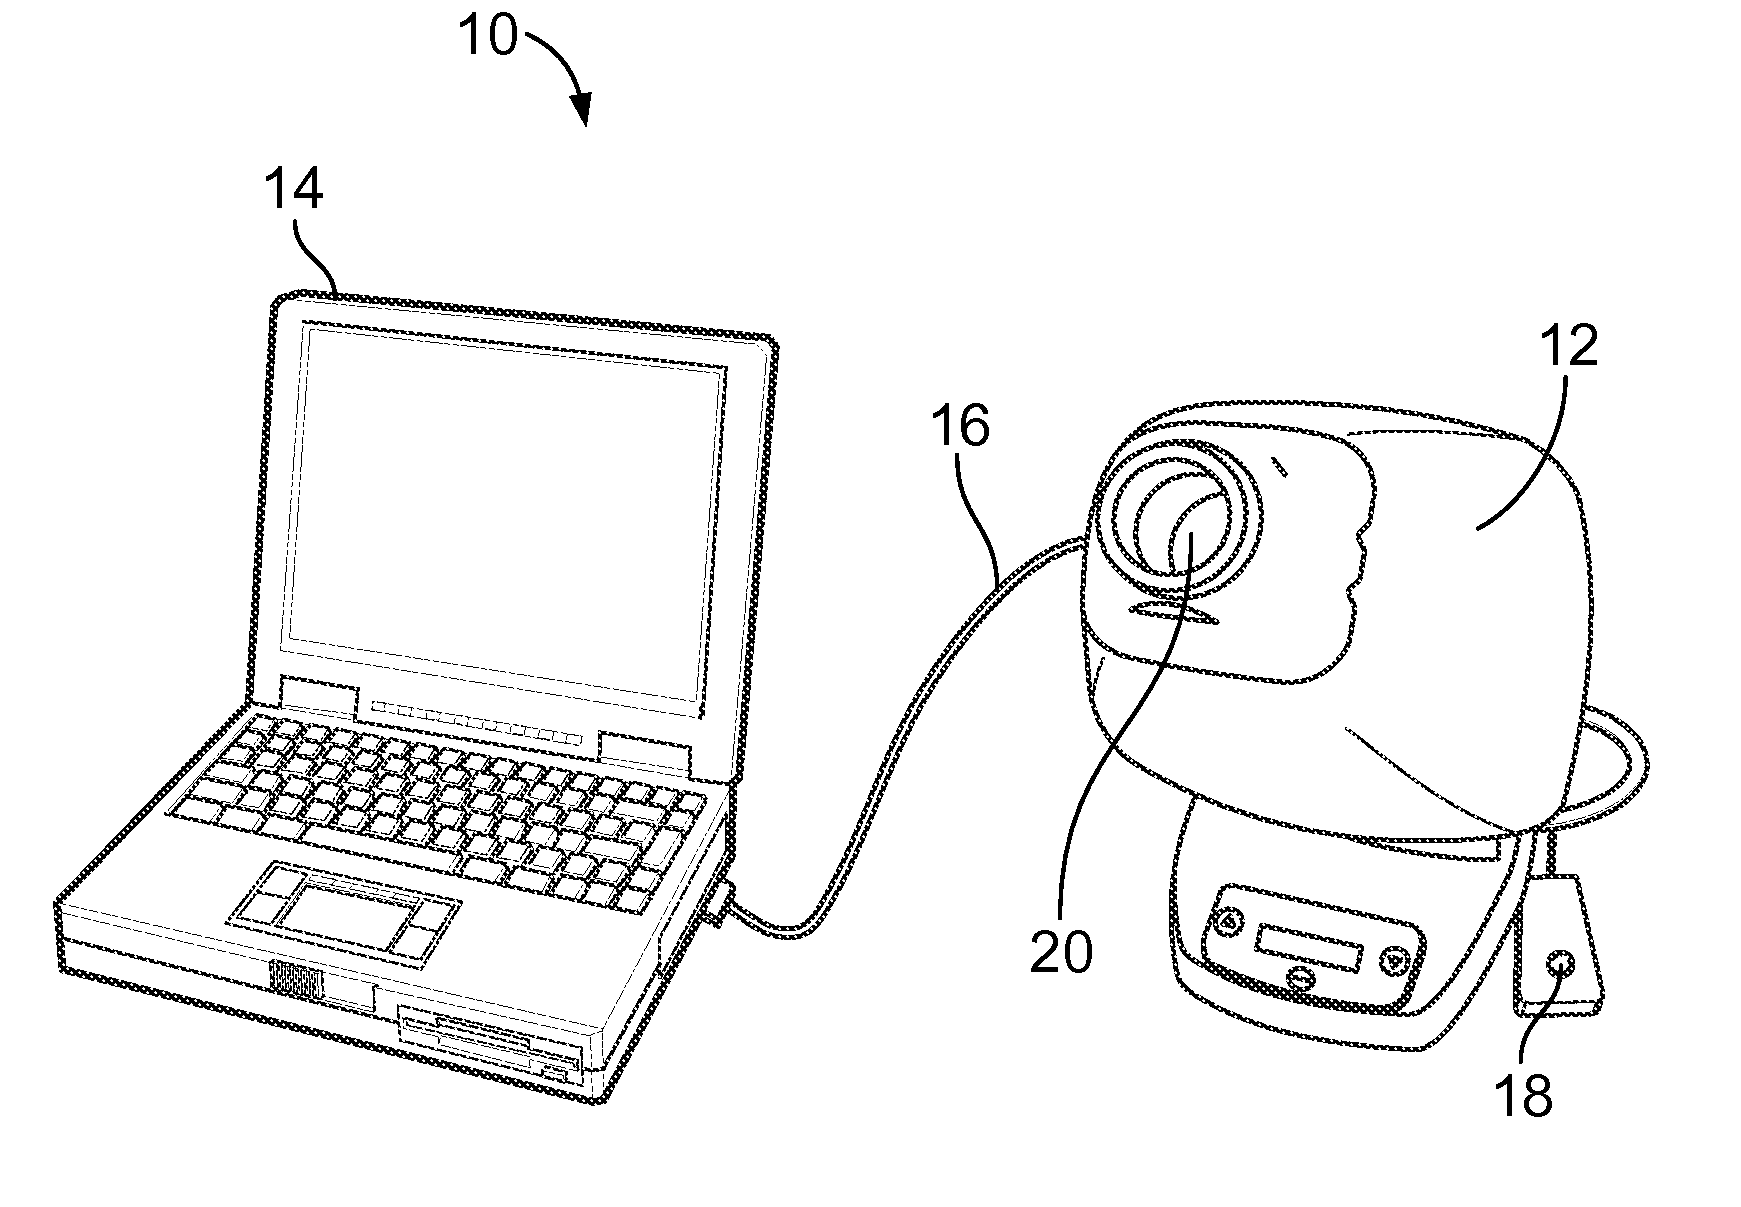 Macular Pigment Measurement Device With Data Quality Indexing Feature